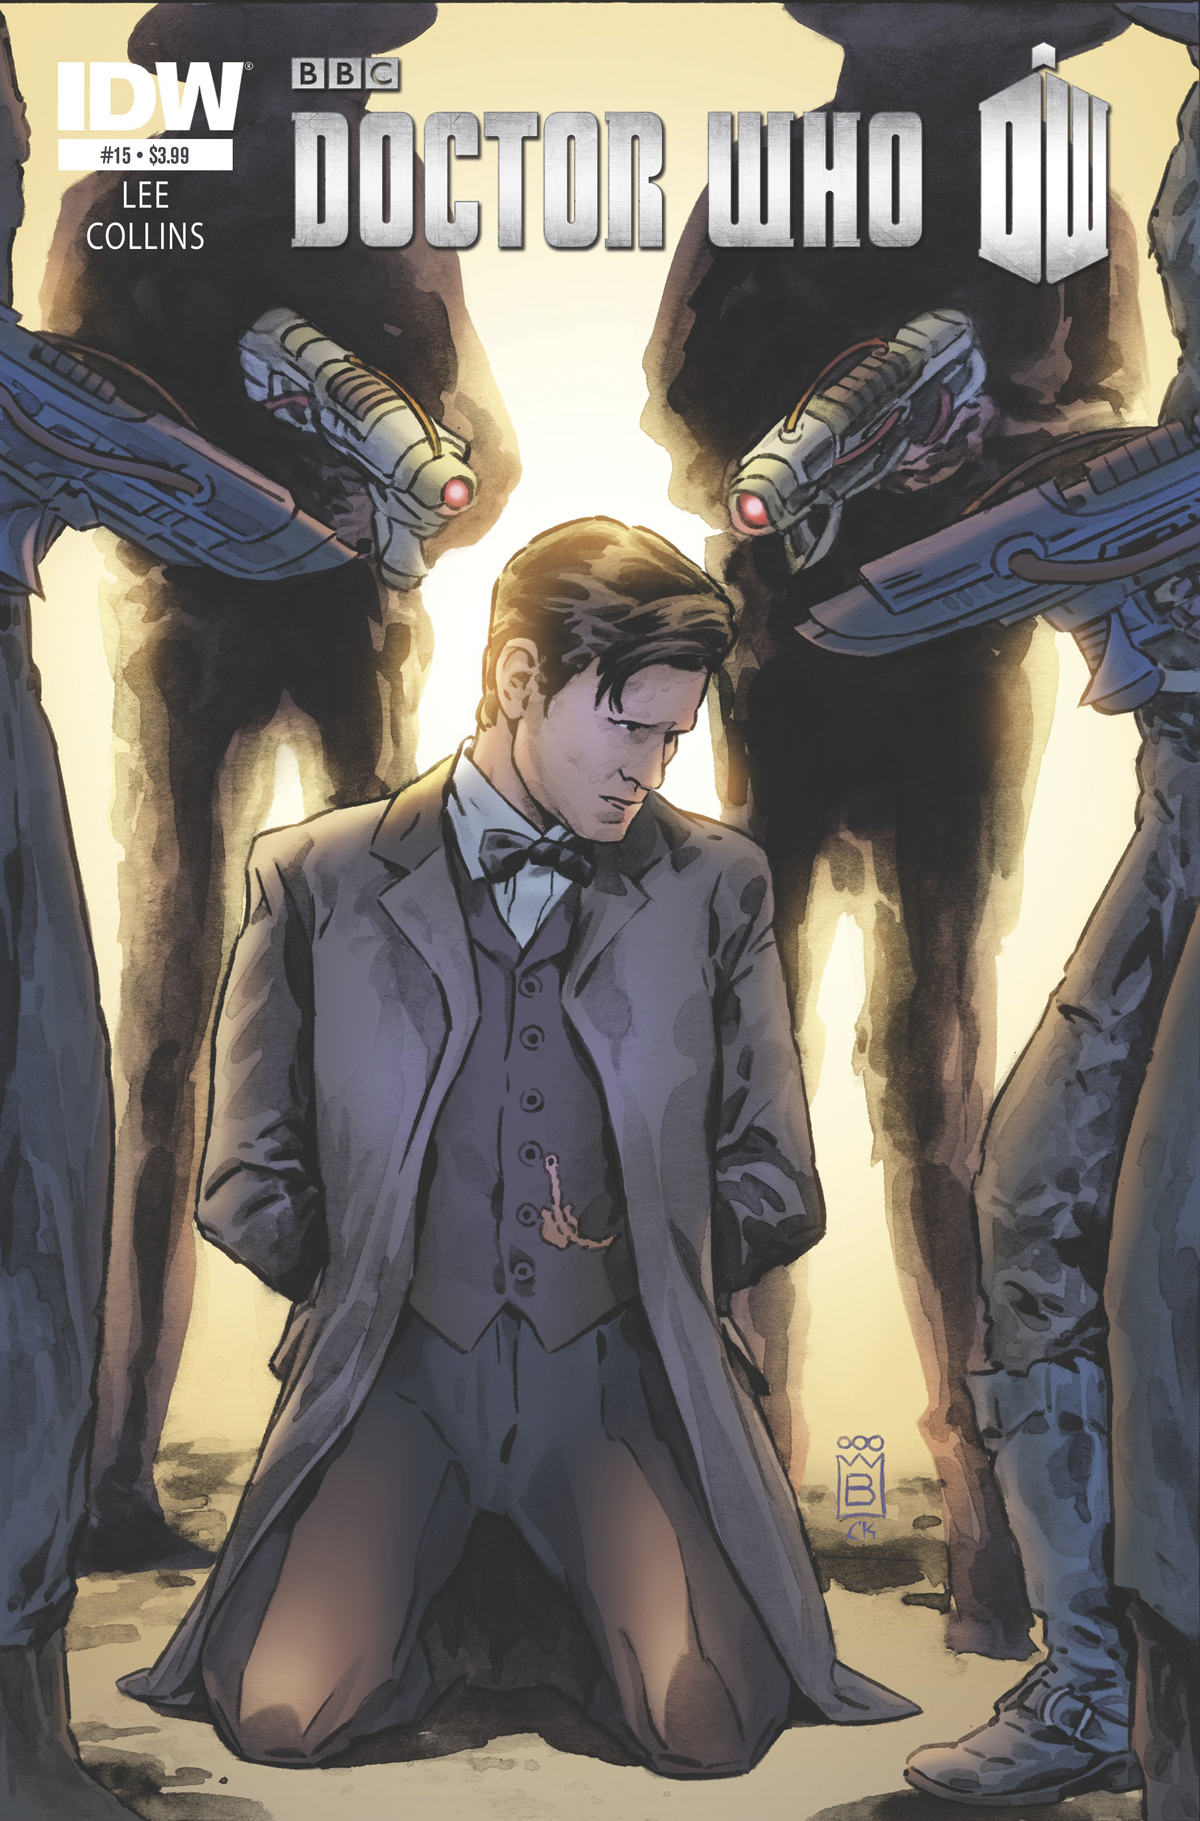 DOCTOR WHO VOL 3 #15